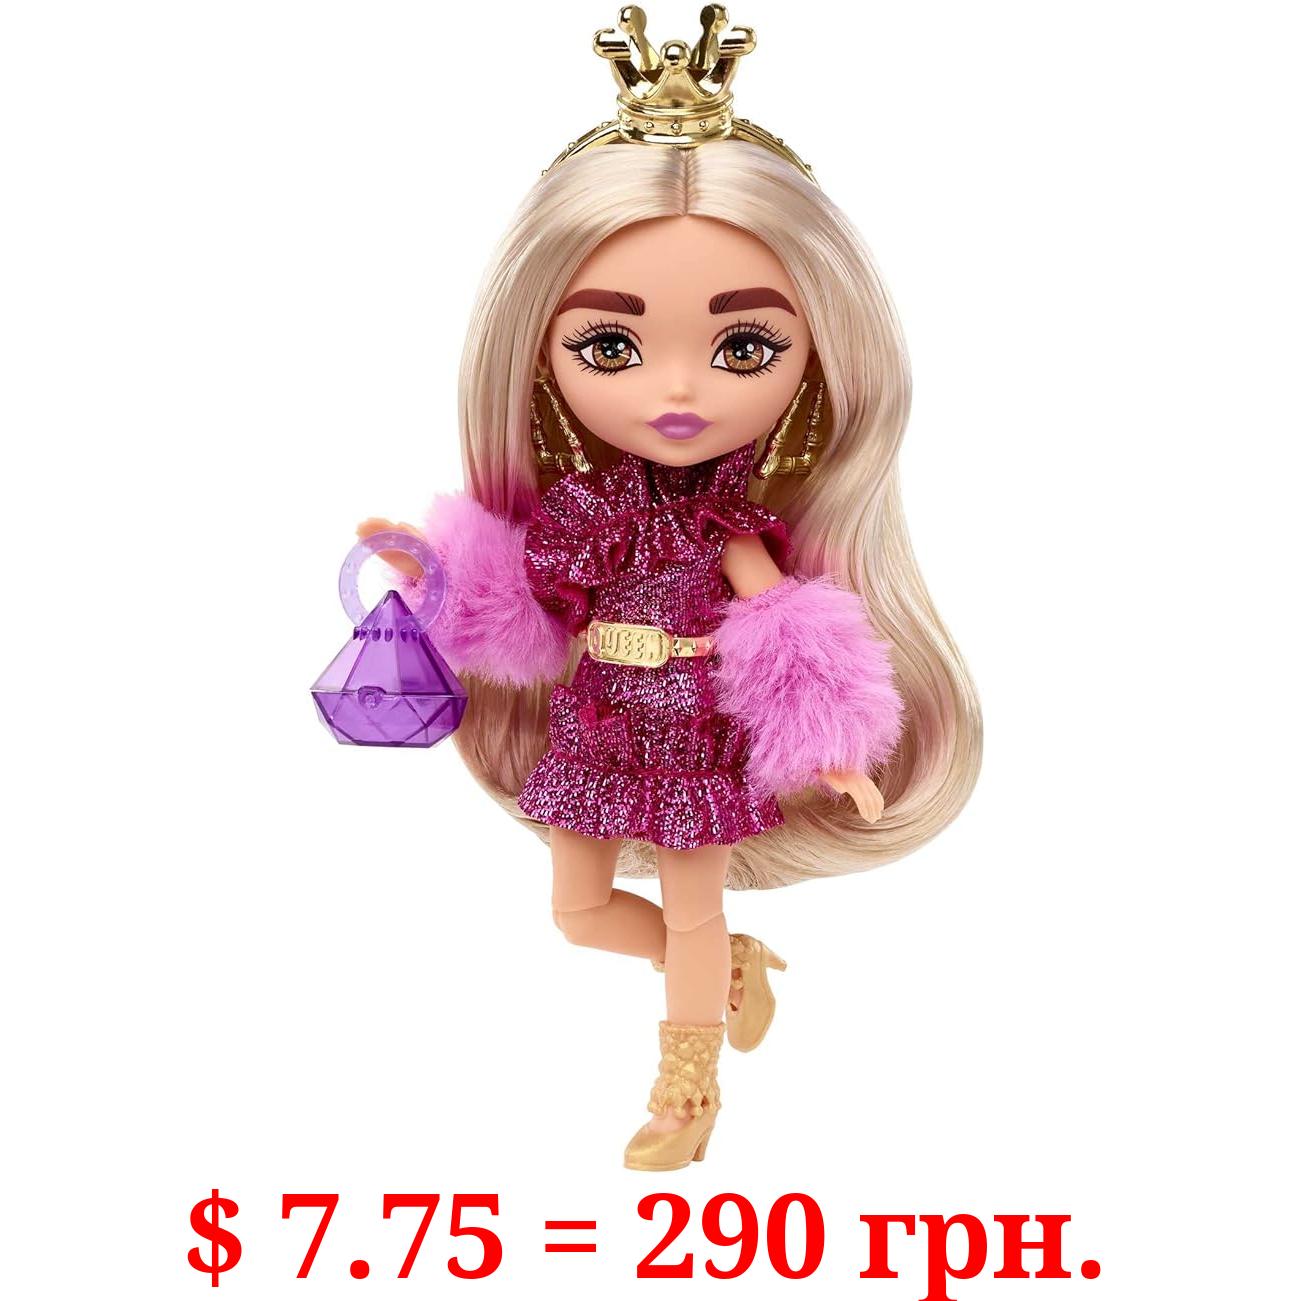 Barbie Extra Minis Doll & Accessories with Blonde Hair, Toy Pieces Include Shimmery Dress & Furry Shrug